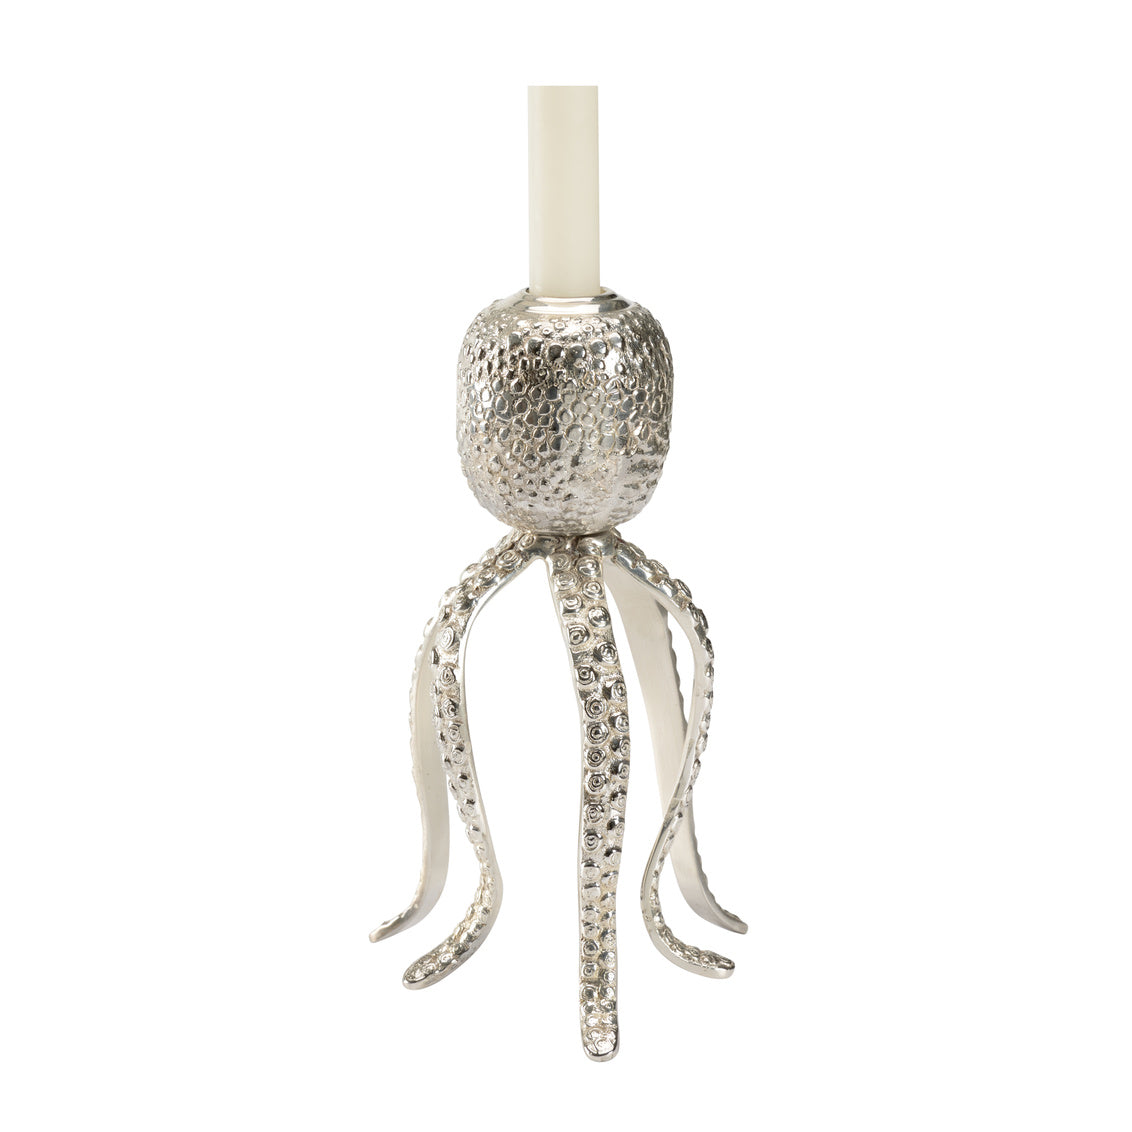 Pacific Octopus Candleholder-Candle Holder-Nautical Decor and Gifts